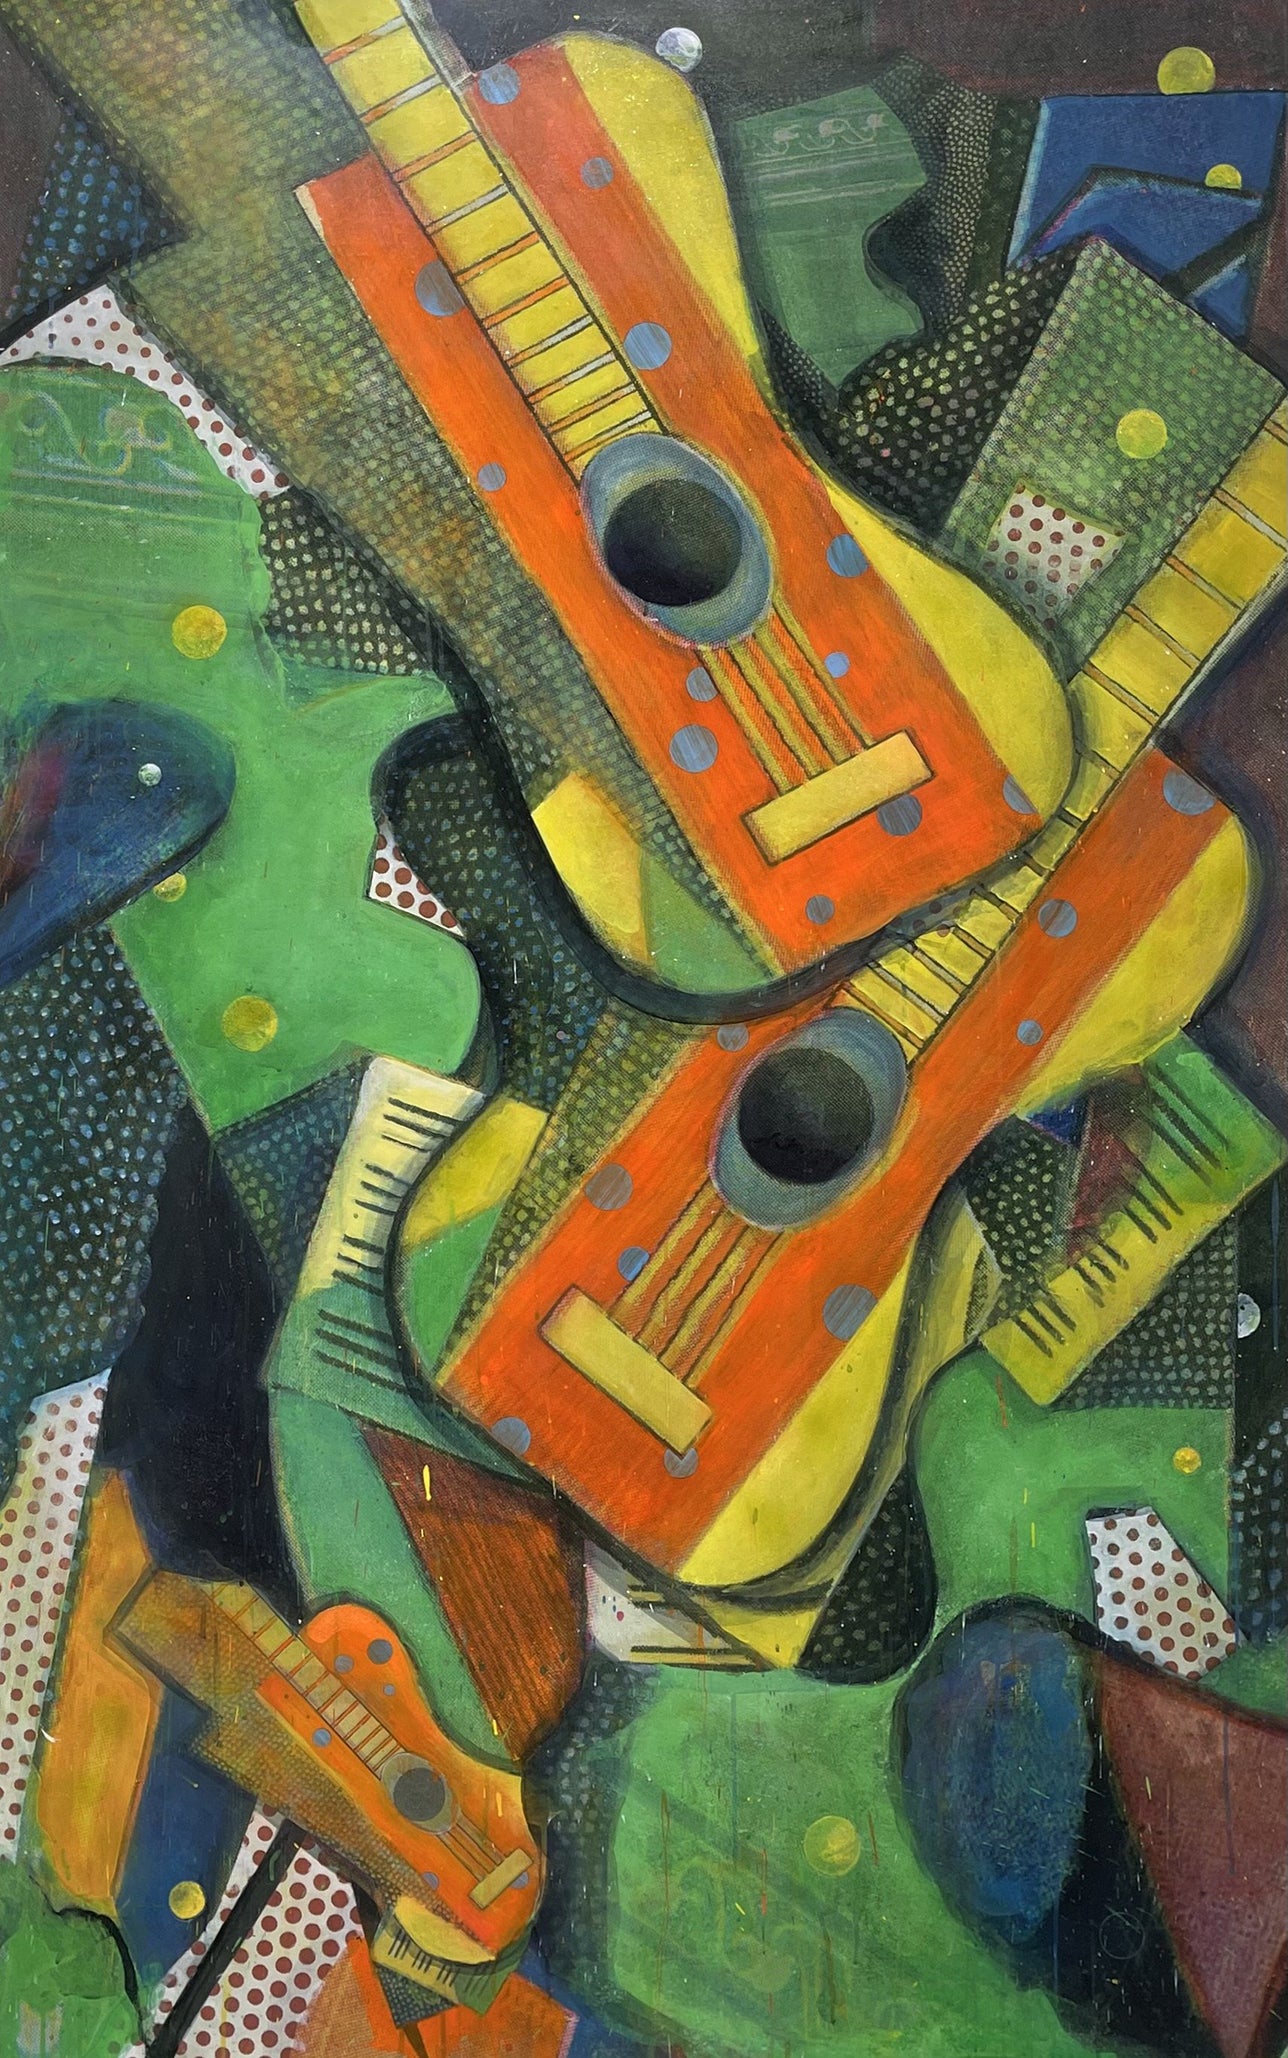 Bruce Helander (b.1947-) Triple Accoustics, 2019  Acrylic with Printed Background on canvas  79.25 x 50.25 inches  Triple Acoustics utilizes vintage Picasso imagery first initiated in collage on board and transferred to canvas.  Helander is an artist whose specialty is collage and assemblage. He received a BFA and MFA in painting from the Rhode Island School of Design. Available at Manolis Projects Gallery, Miami, FL